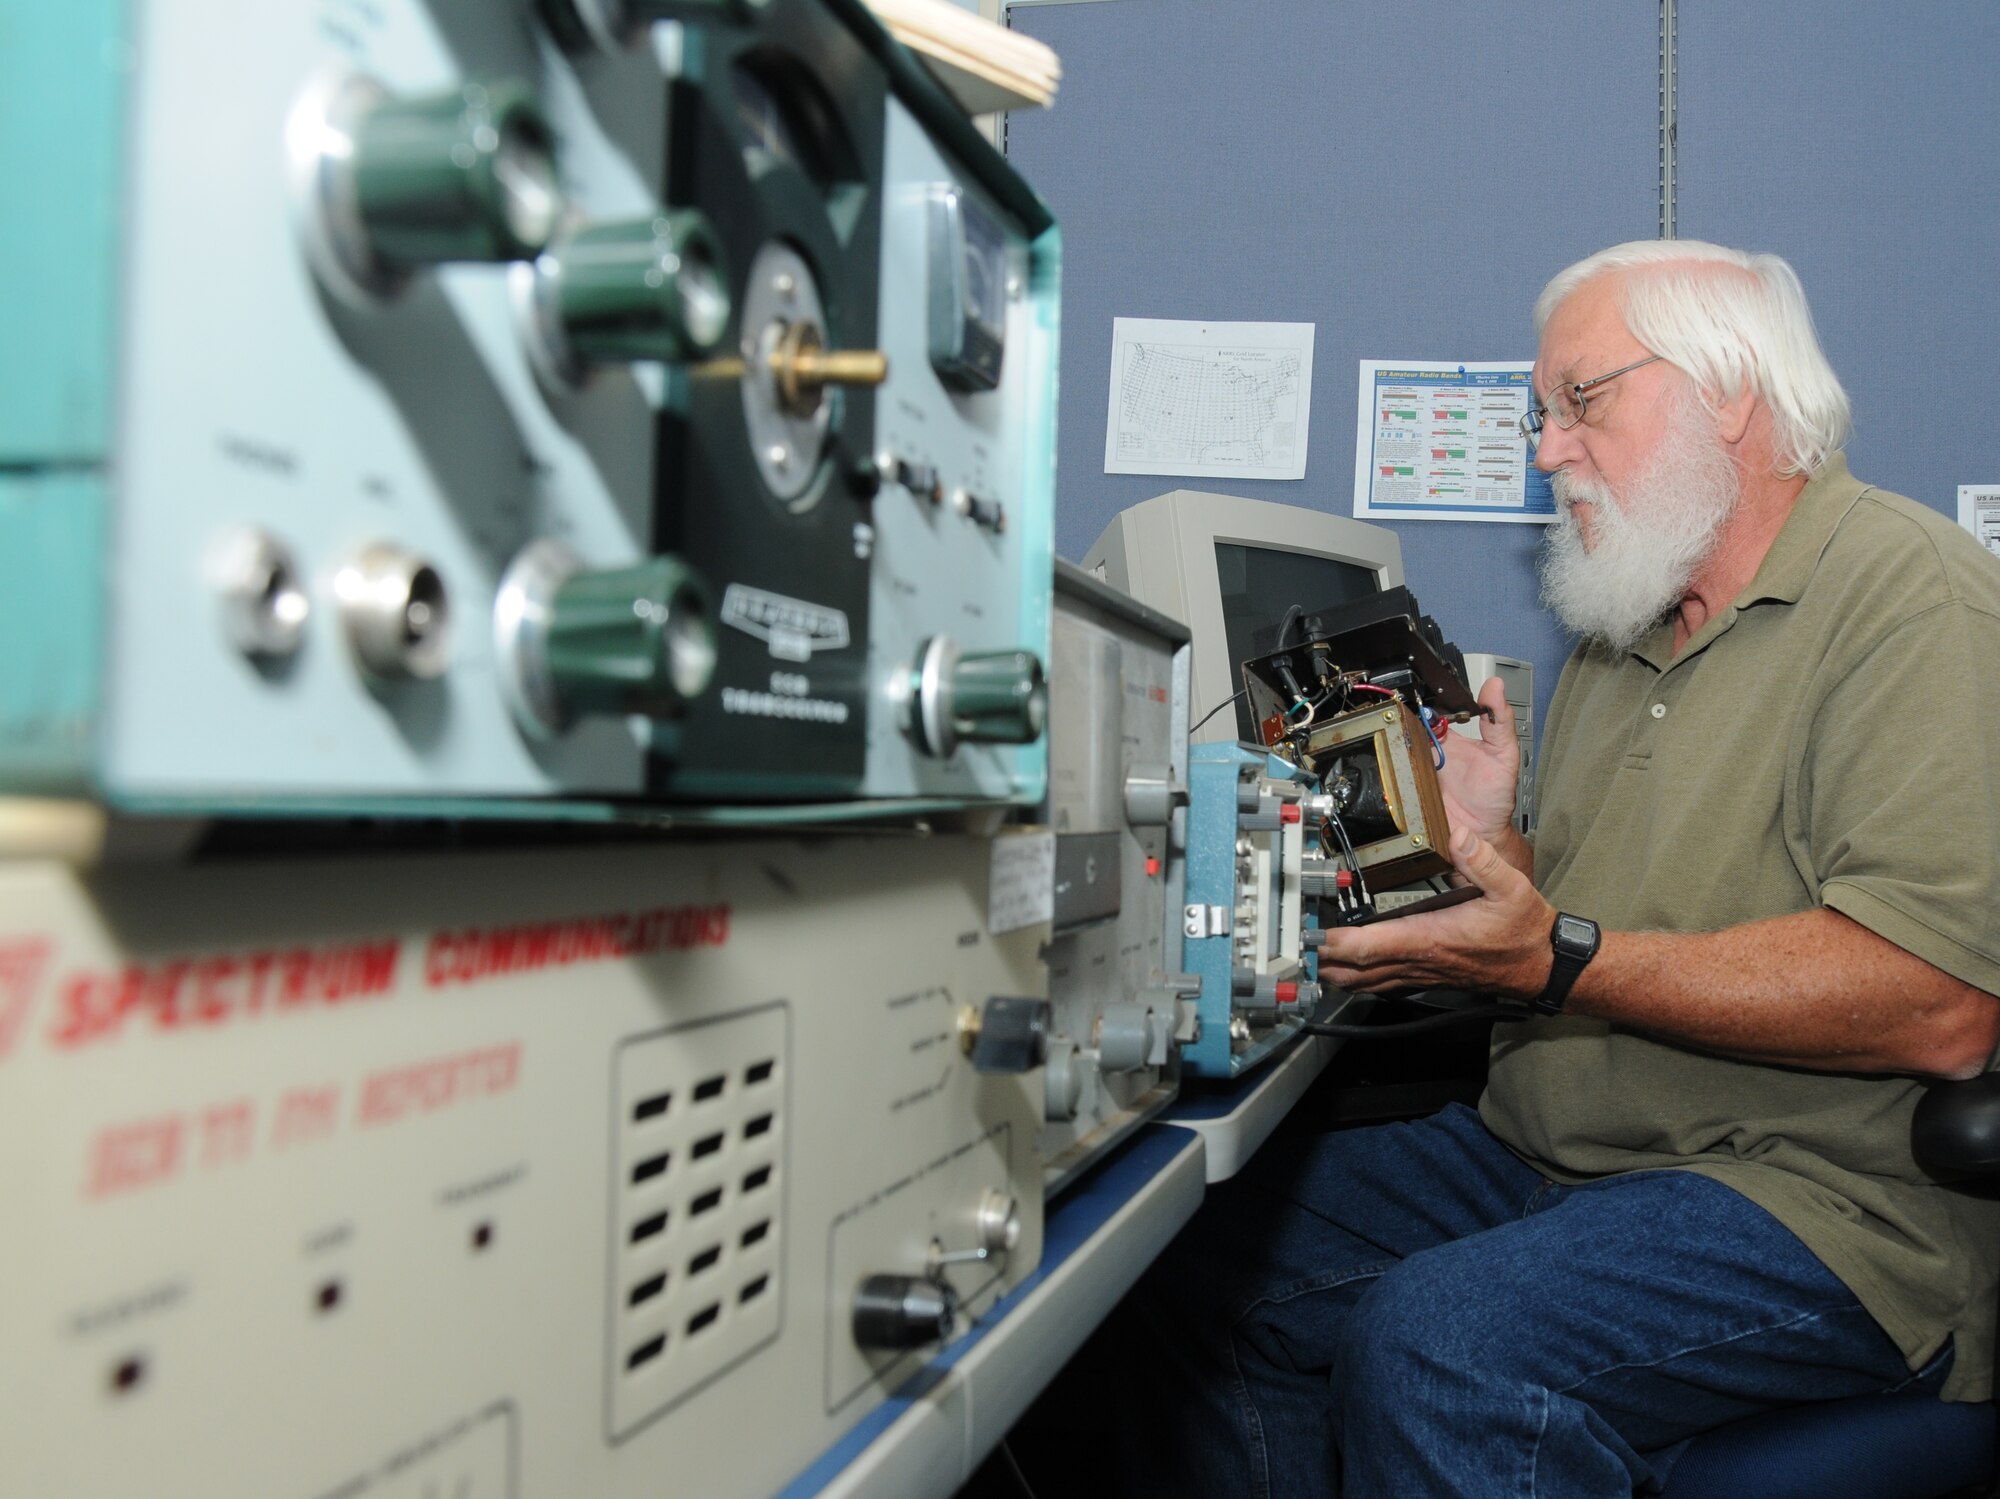 Harry Samuelson, president of the Keesler Amateur Radio Club, inspects the power supply of various antique radio equipment Nov. 7, 2011 at Keesler Air Force Base, Miss.  There are currently six club members.  (U.S. Air Force photo by Kemberly Groue)